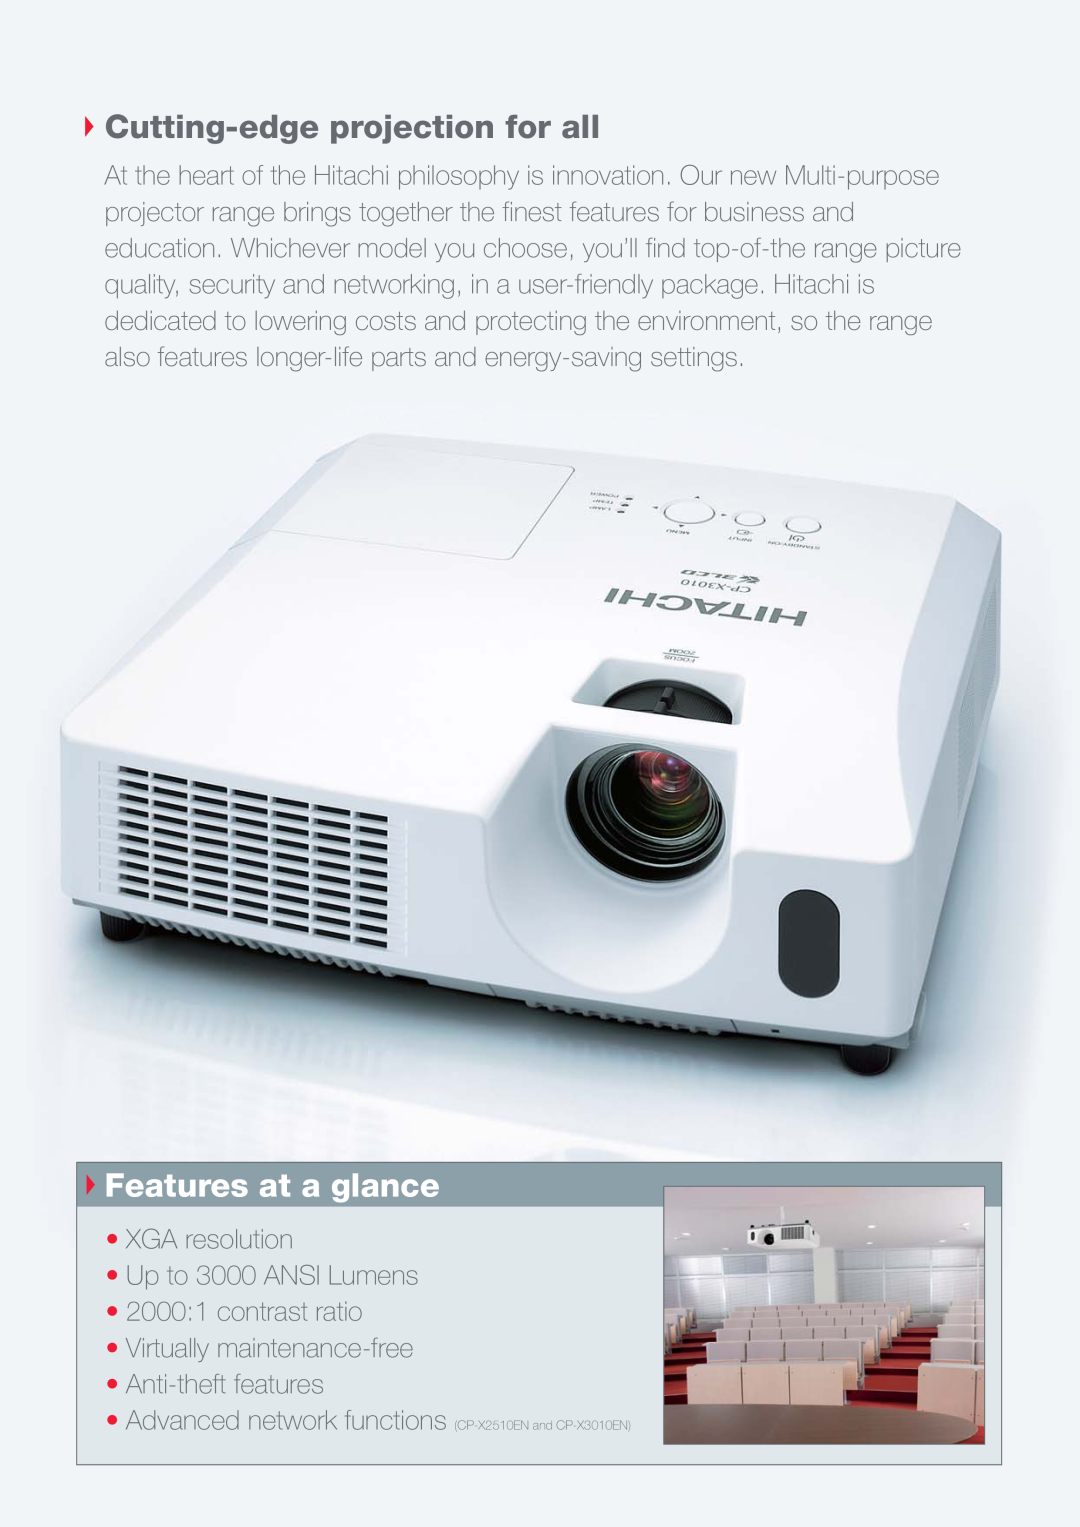 Hitachi CP-X2510EN Cutting-edge projection for all, Features at a glance, Virtually maintenance-free Anti-theft features 